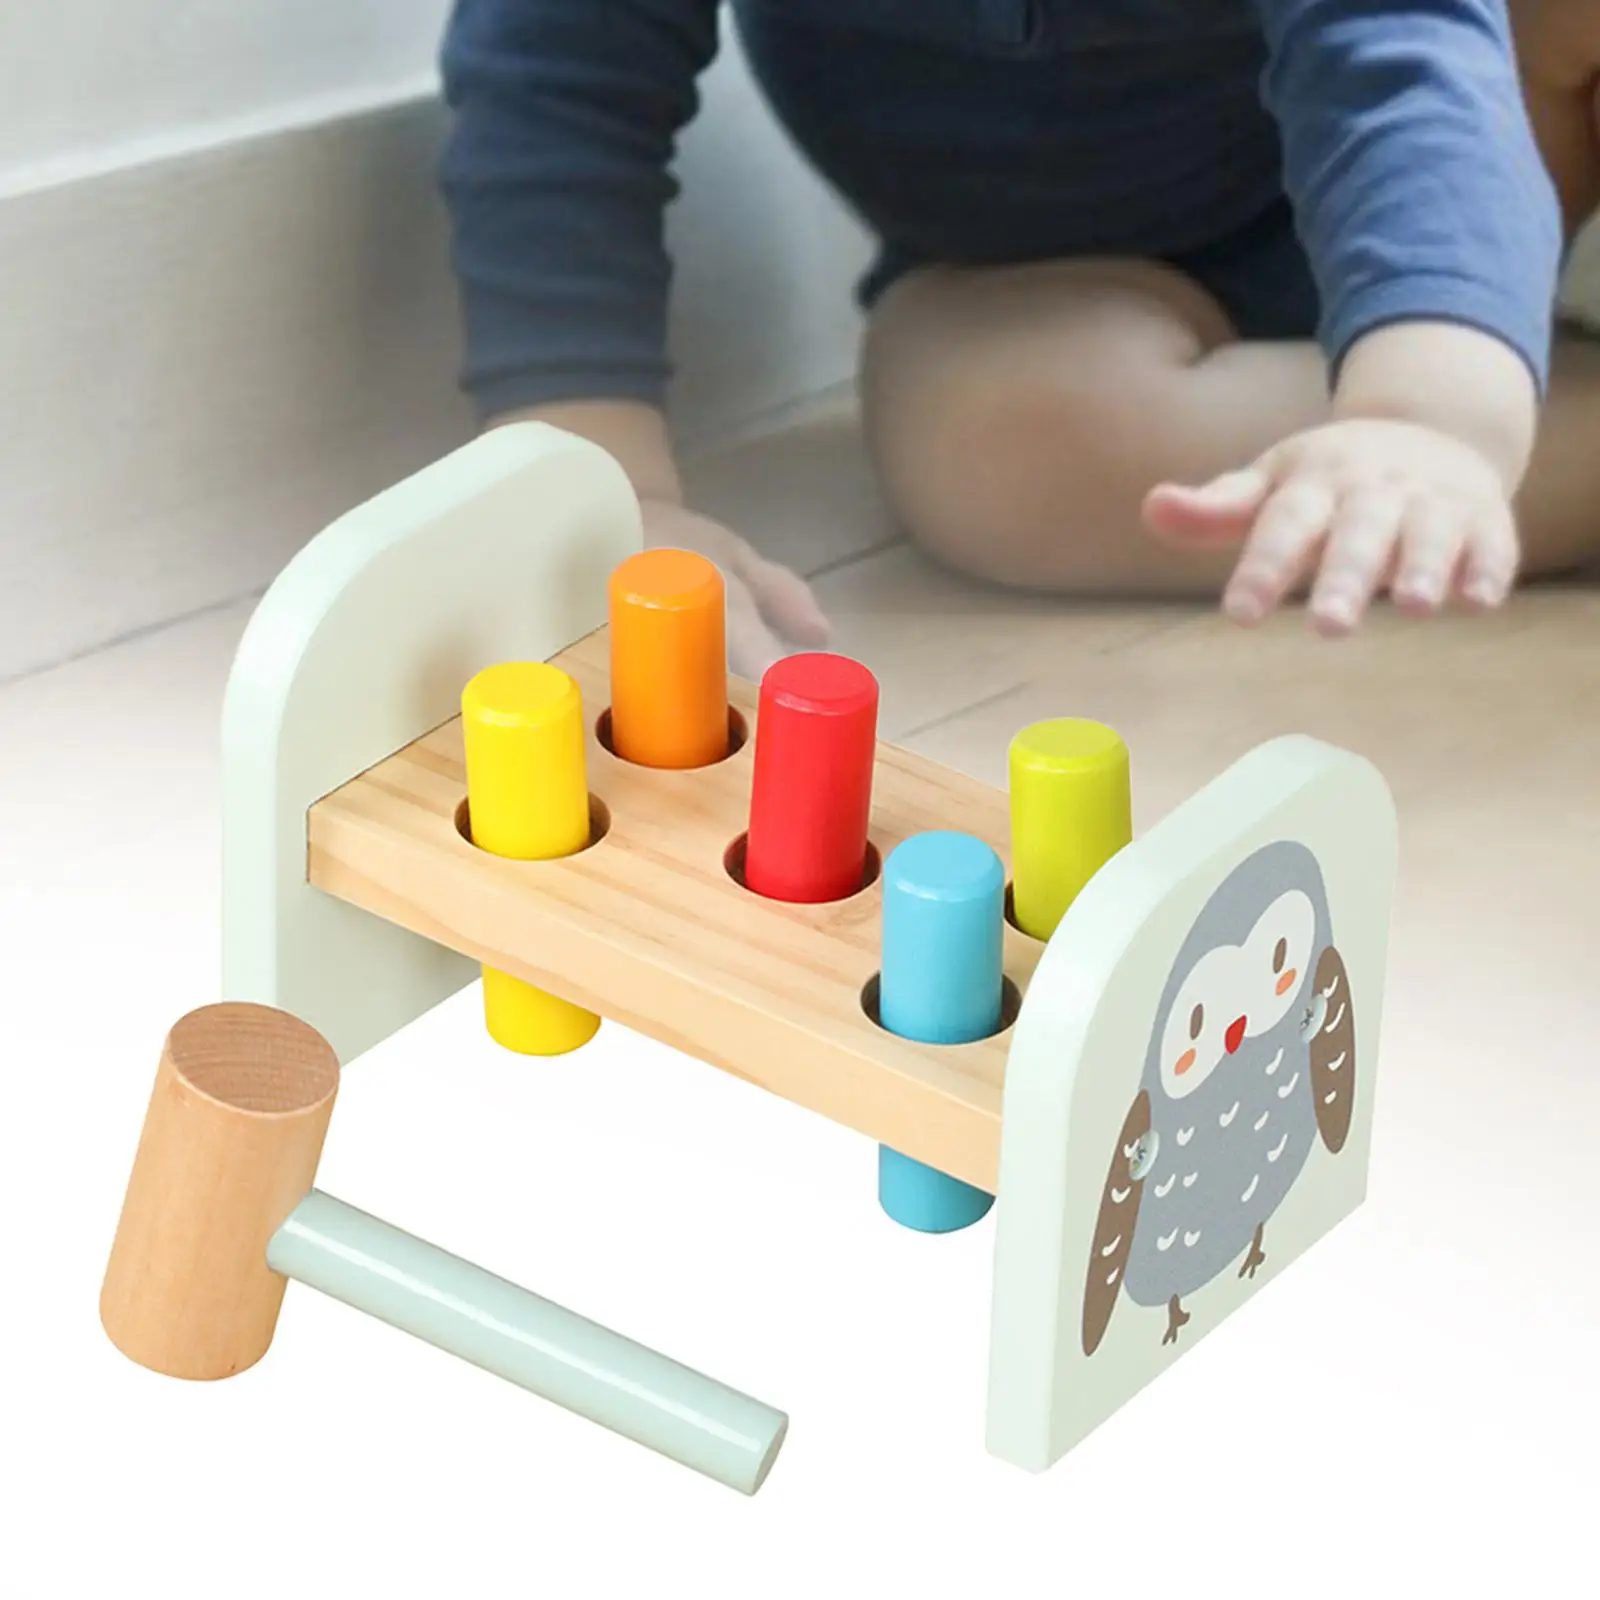 Pounding Bench Wood Toy Early Learning Fine Motor Skills Wooden Pounding Bench for Birthday Gift Party Favors Kids Boys Girls